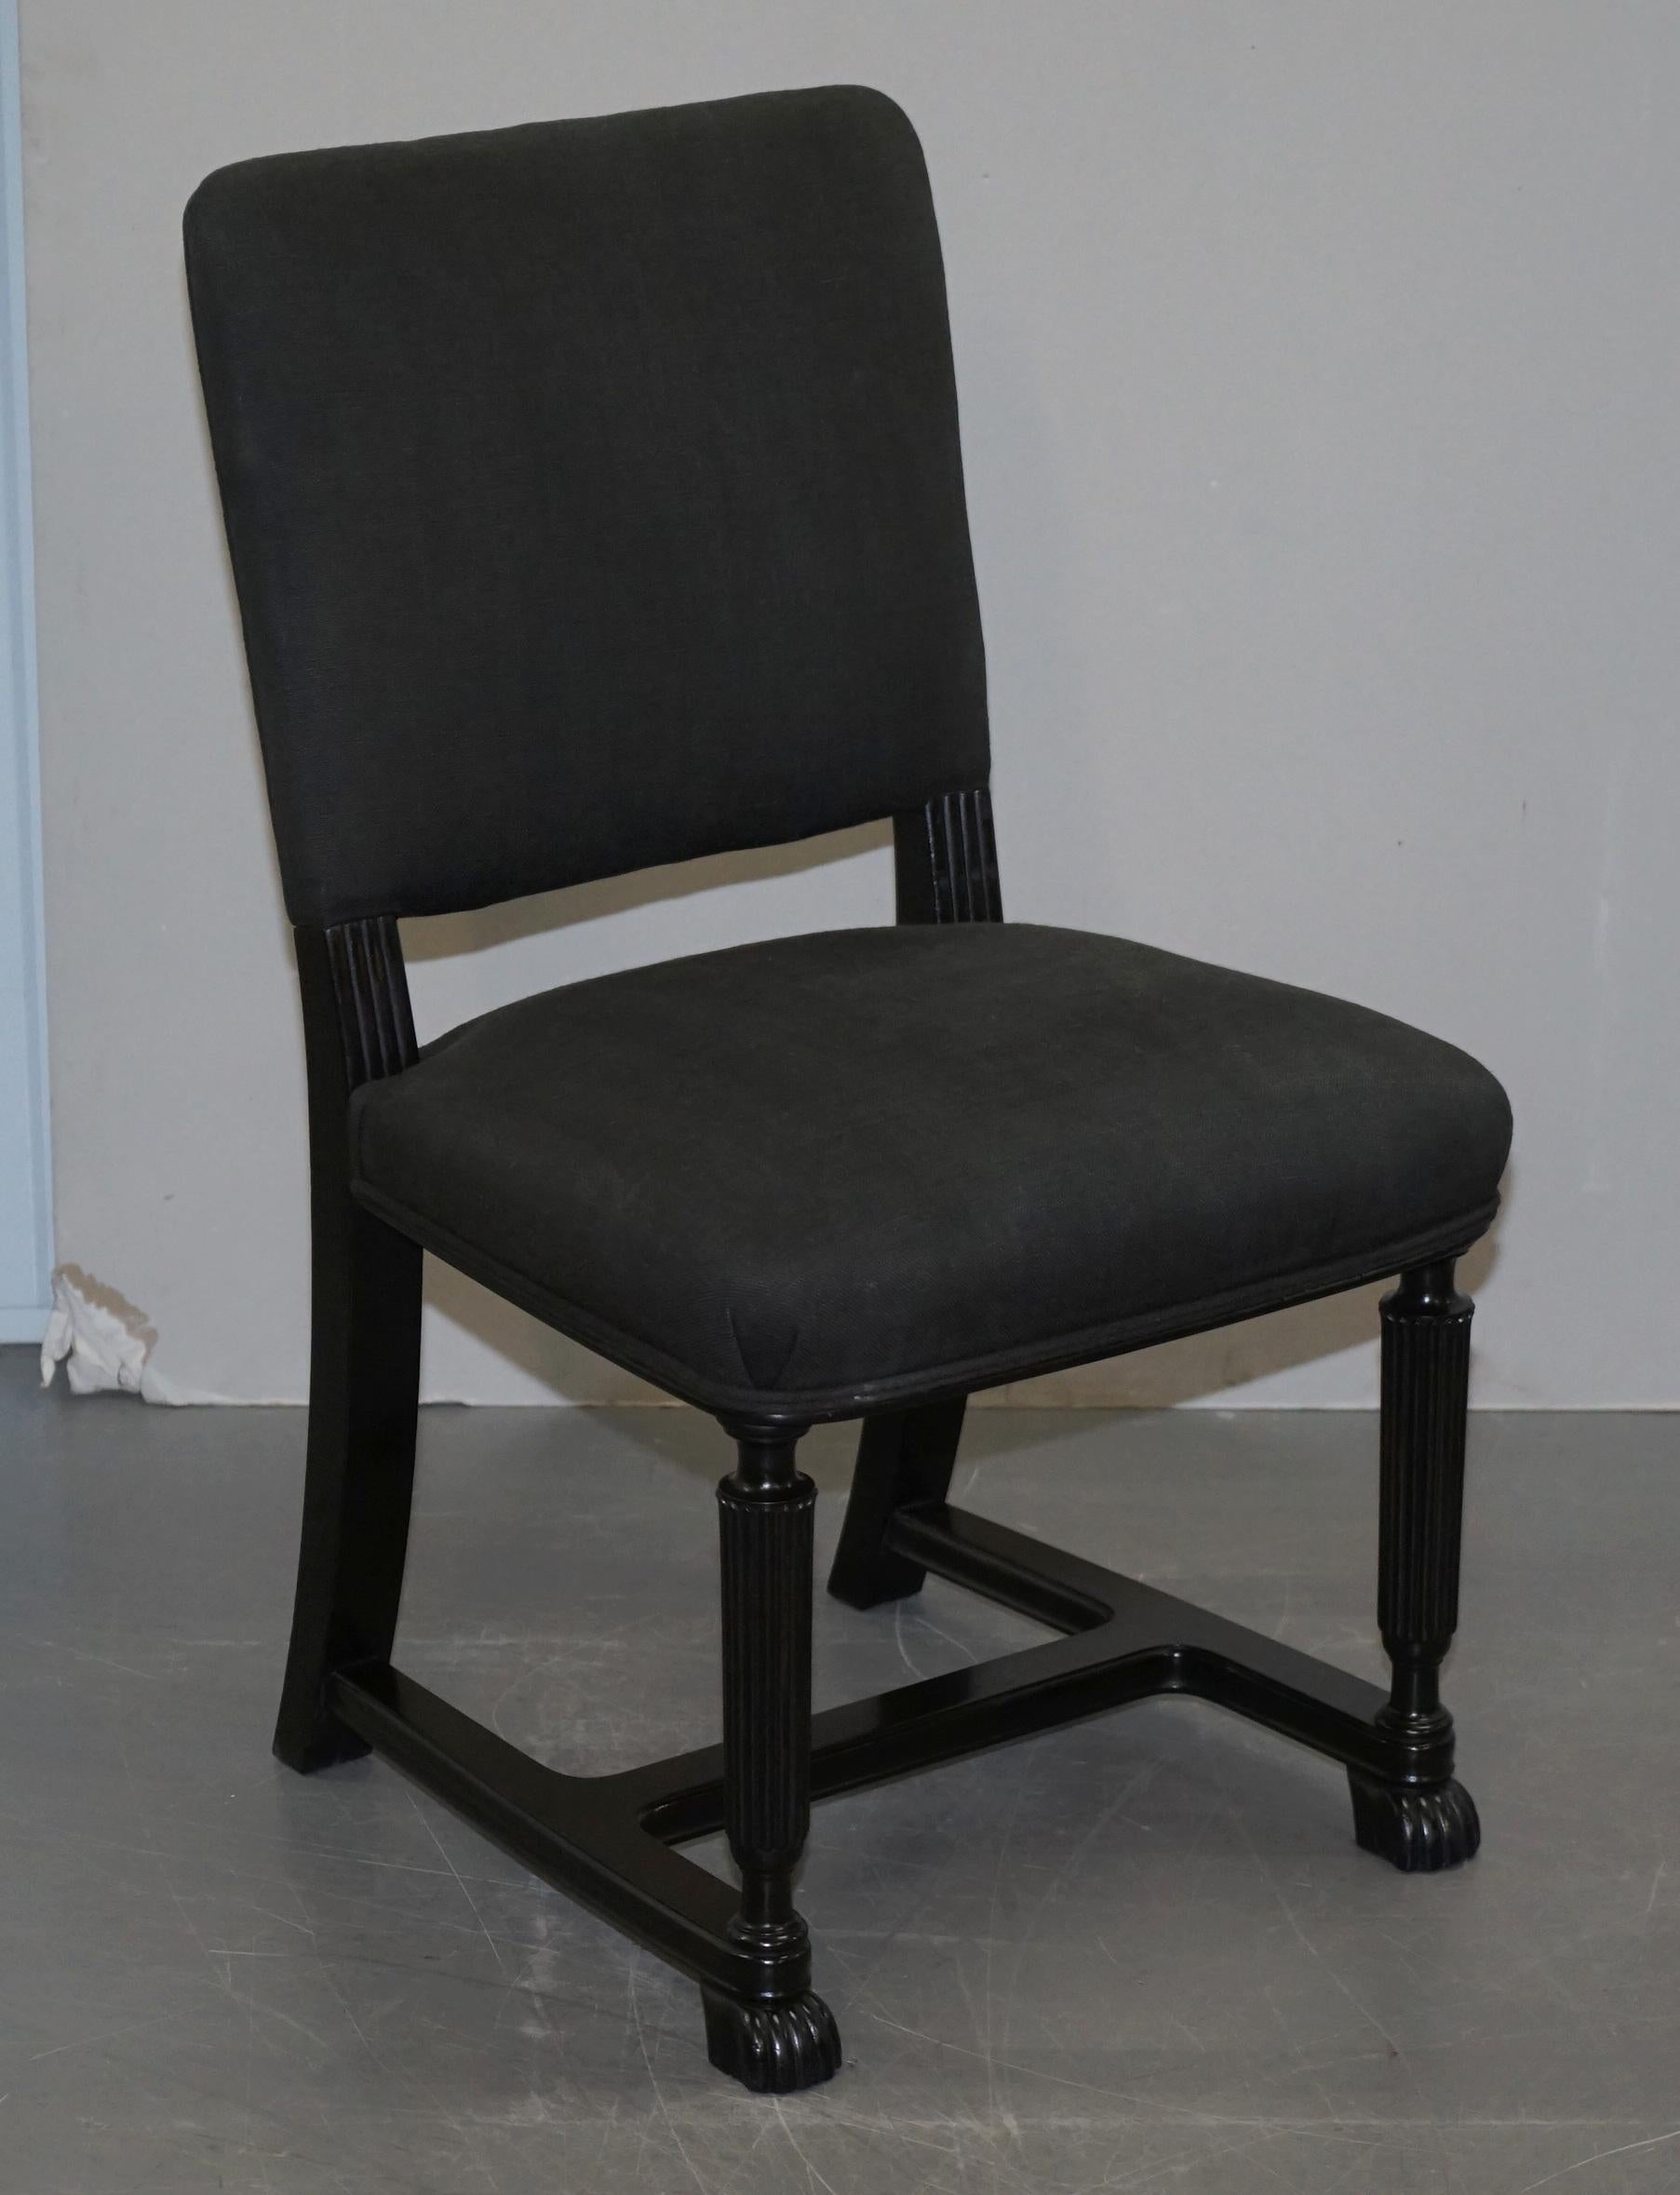 We are delighted to offer for sale this lovely pair of Eichholtz occasional chairs with ebonized frames and grey linen upholstery

These are a very well made pair of chairs, the design is based on circa 1810 Regency style which was very Empire!